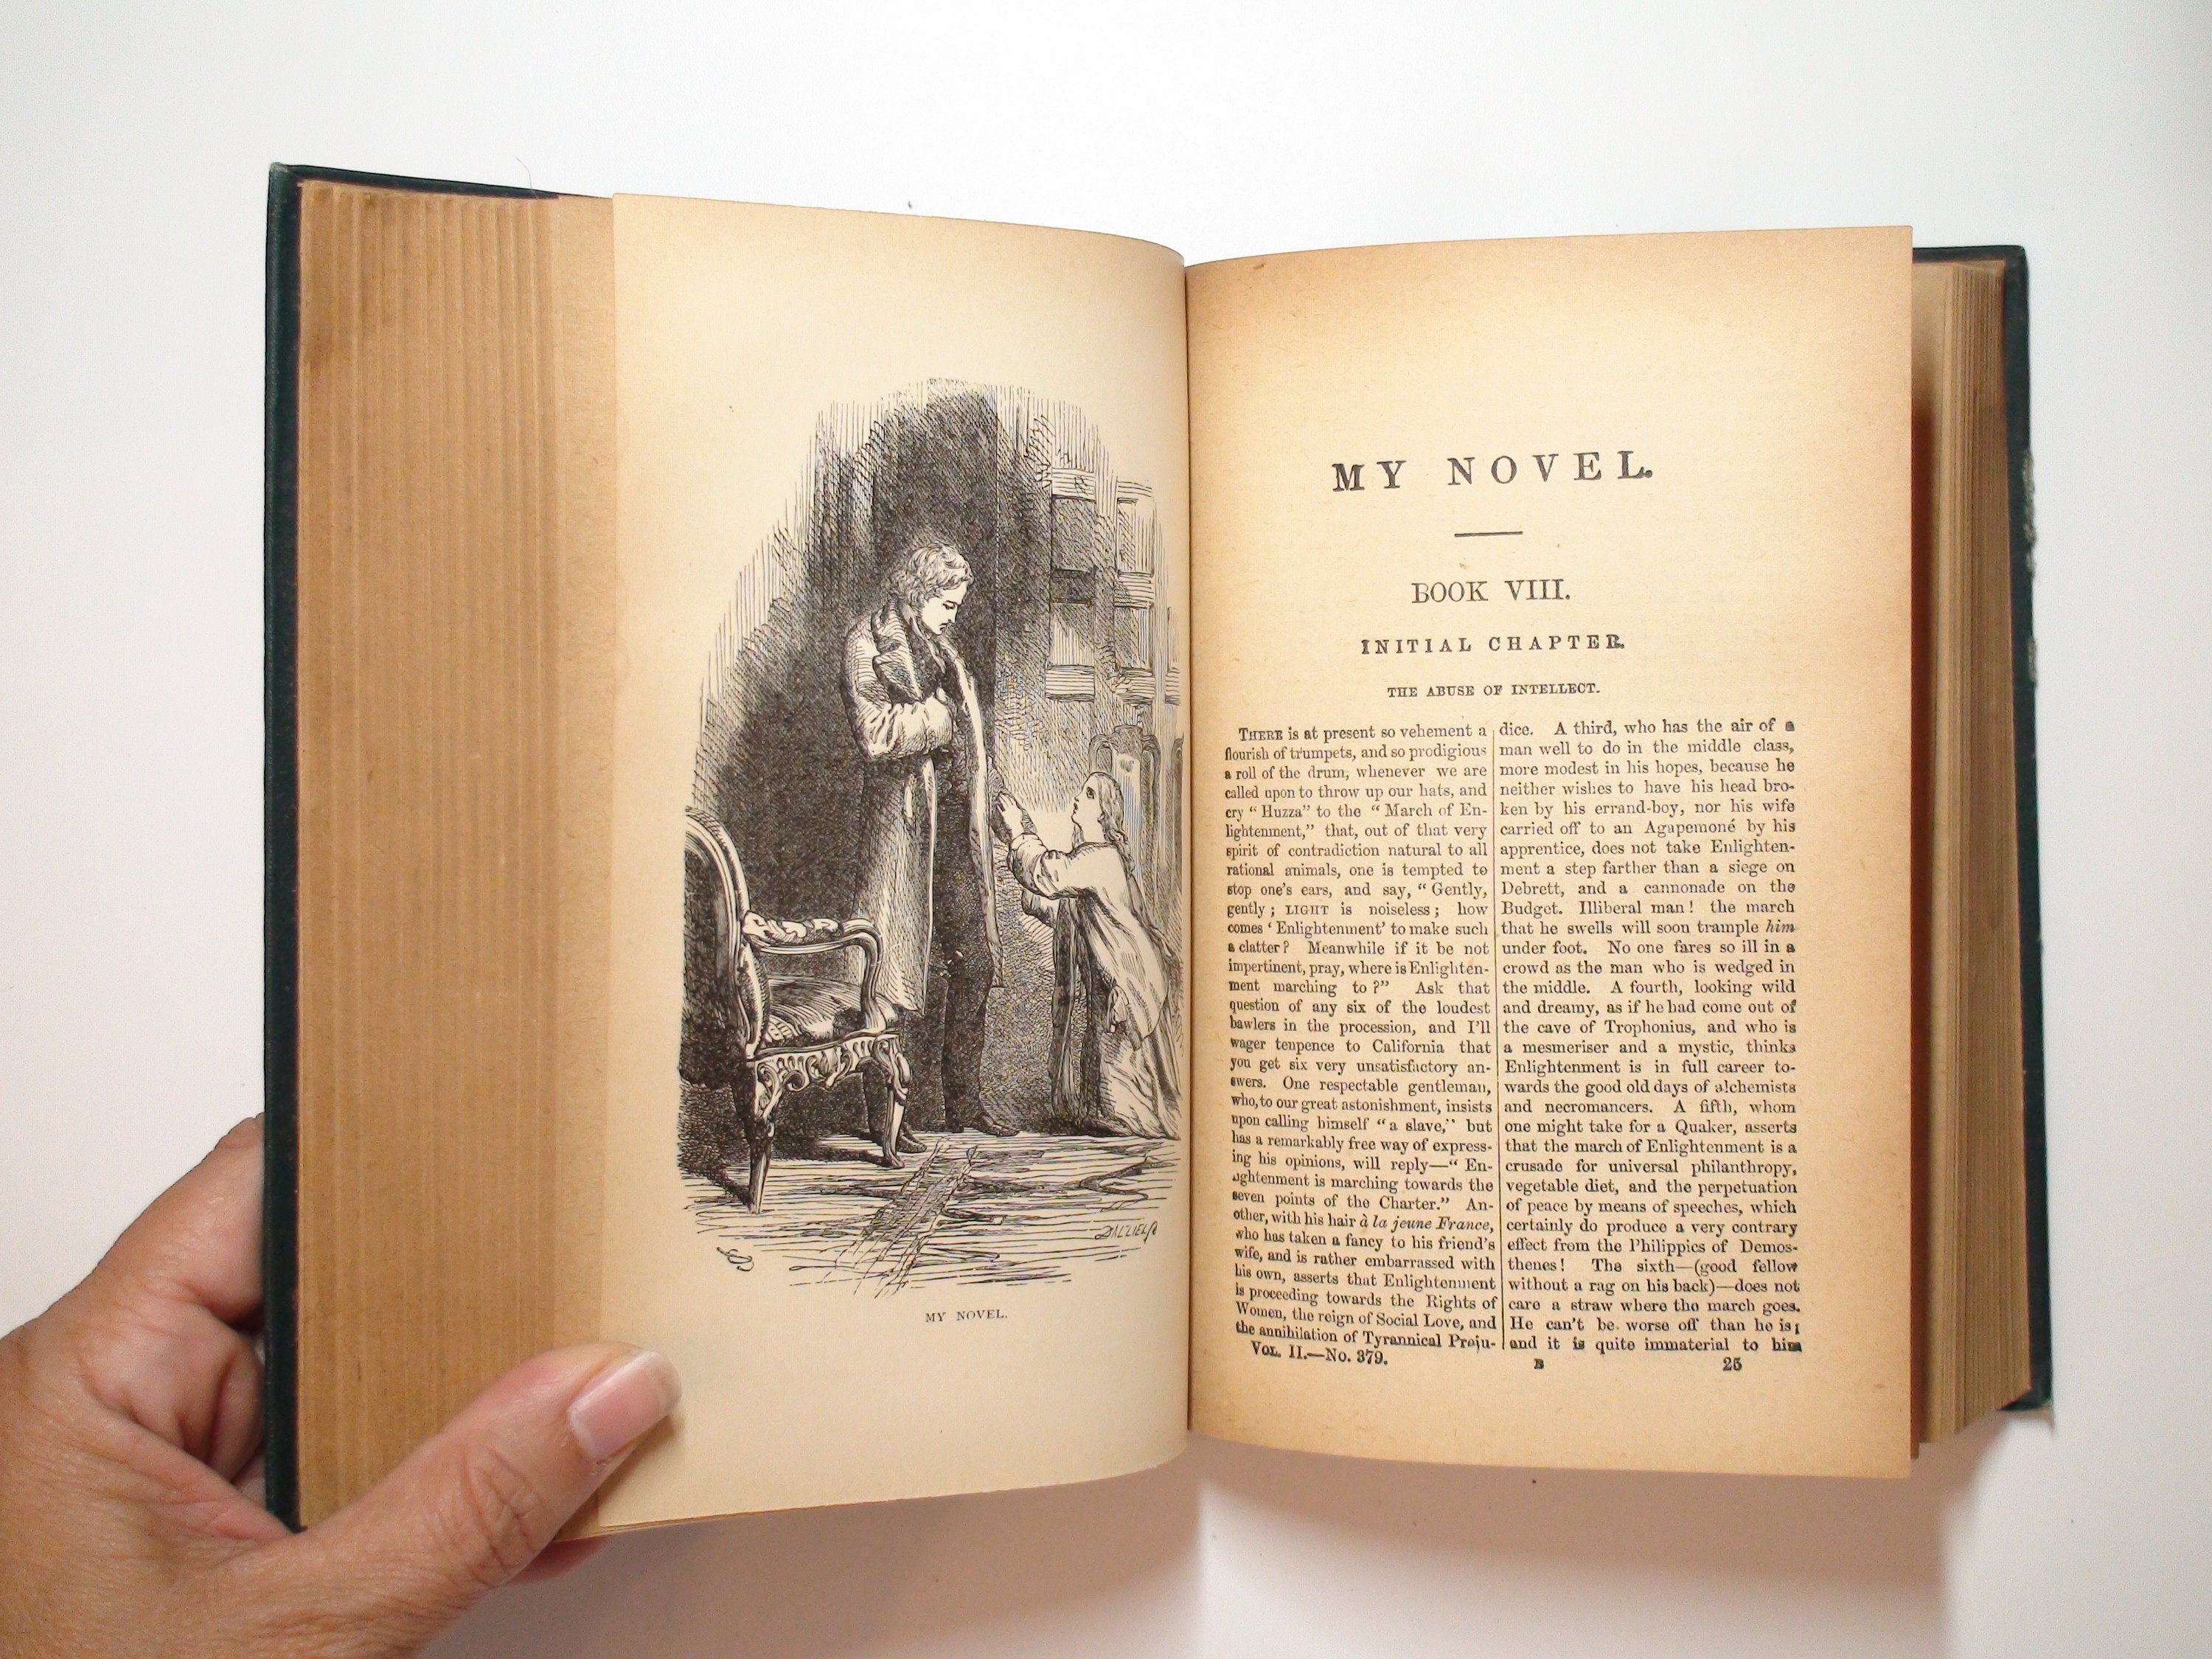 My Novel or Varieties in English Life, Henry Bulwer Lytton, Caxton Ed, 1890s